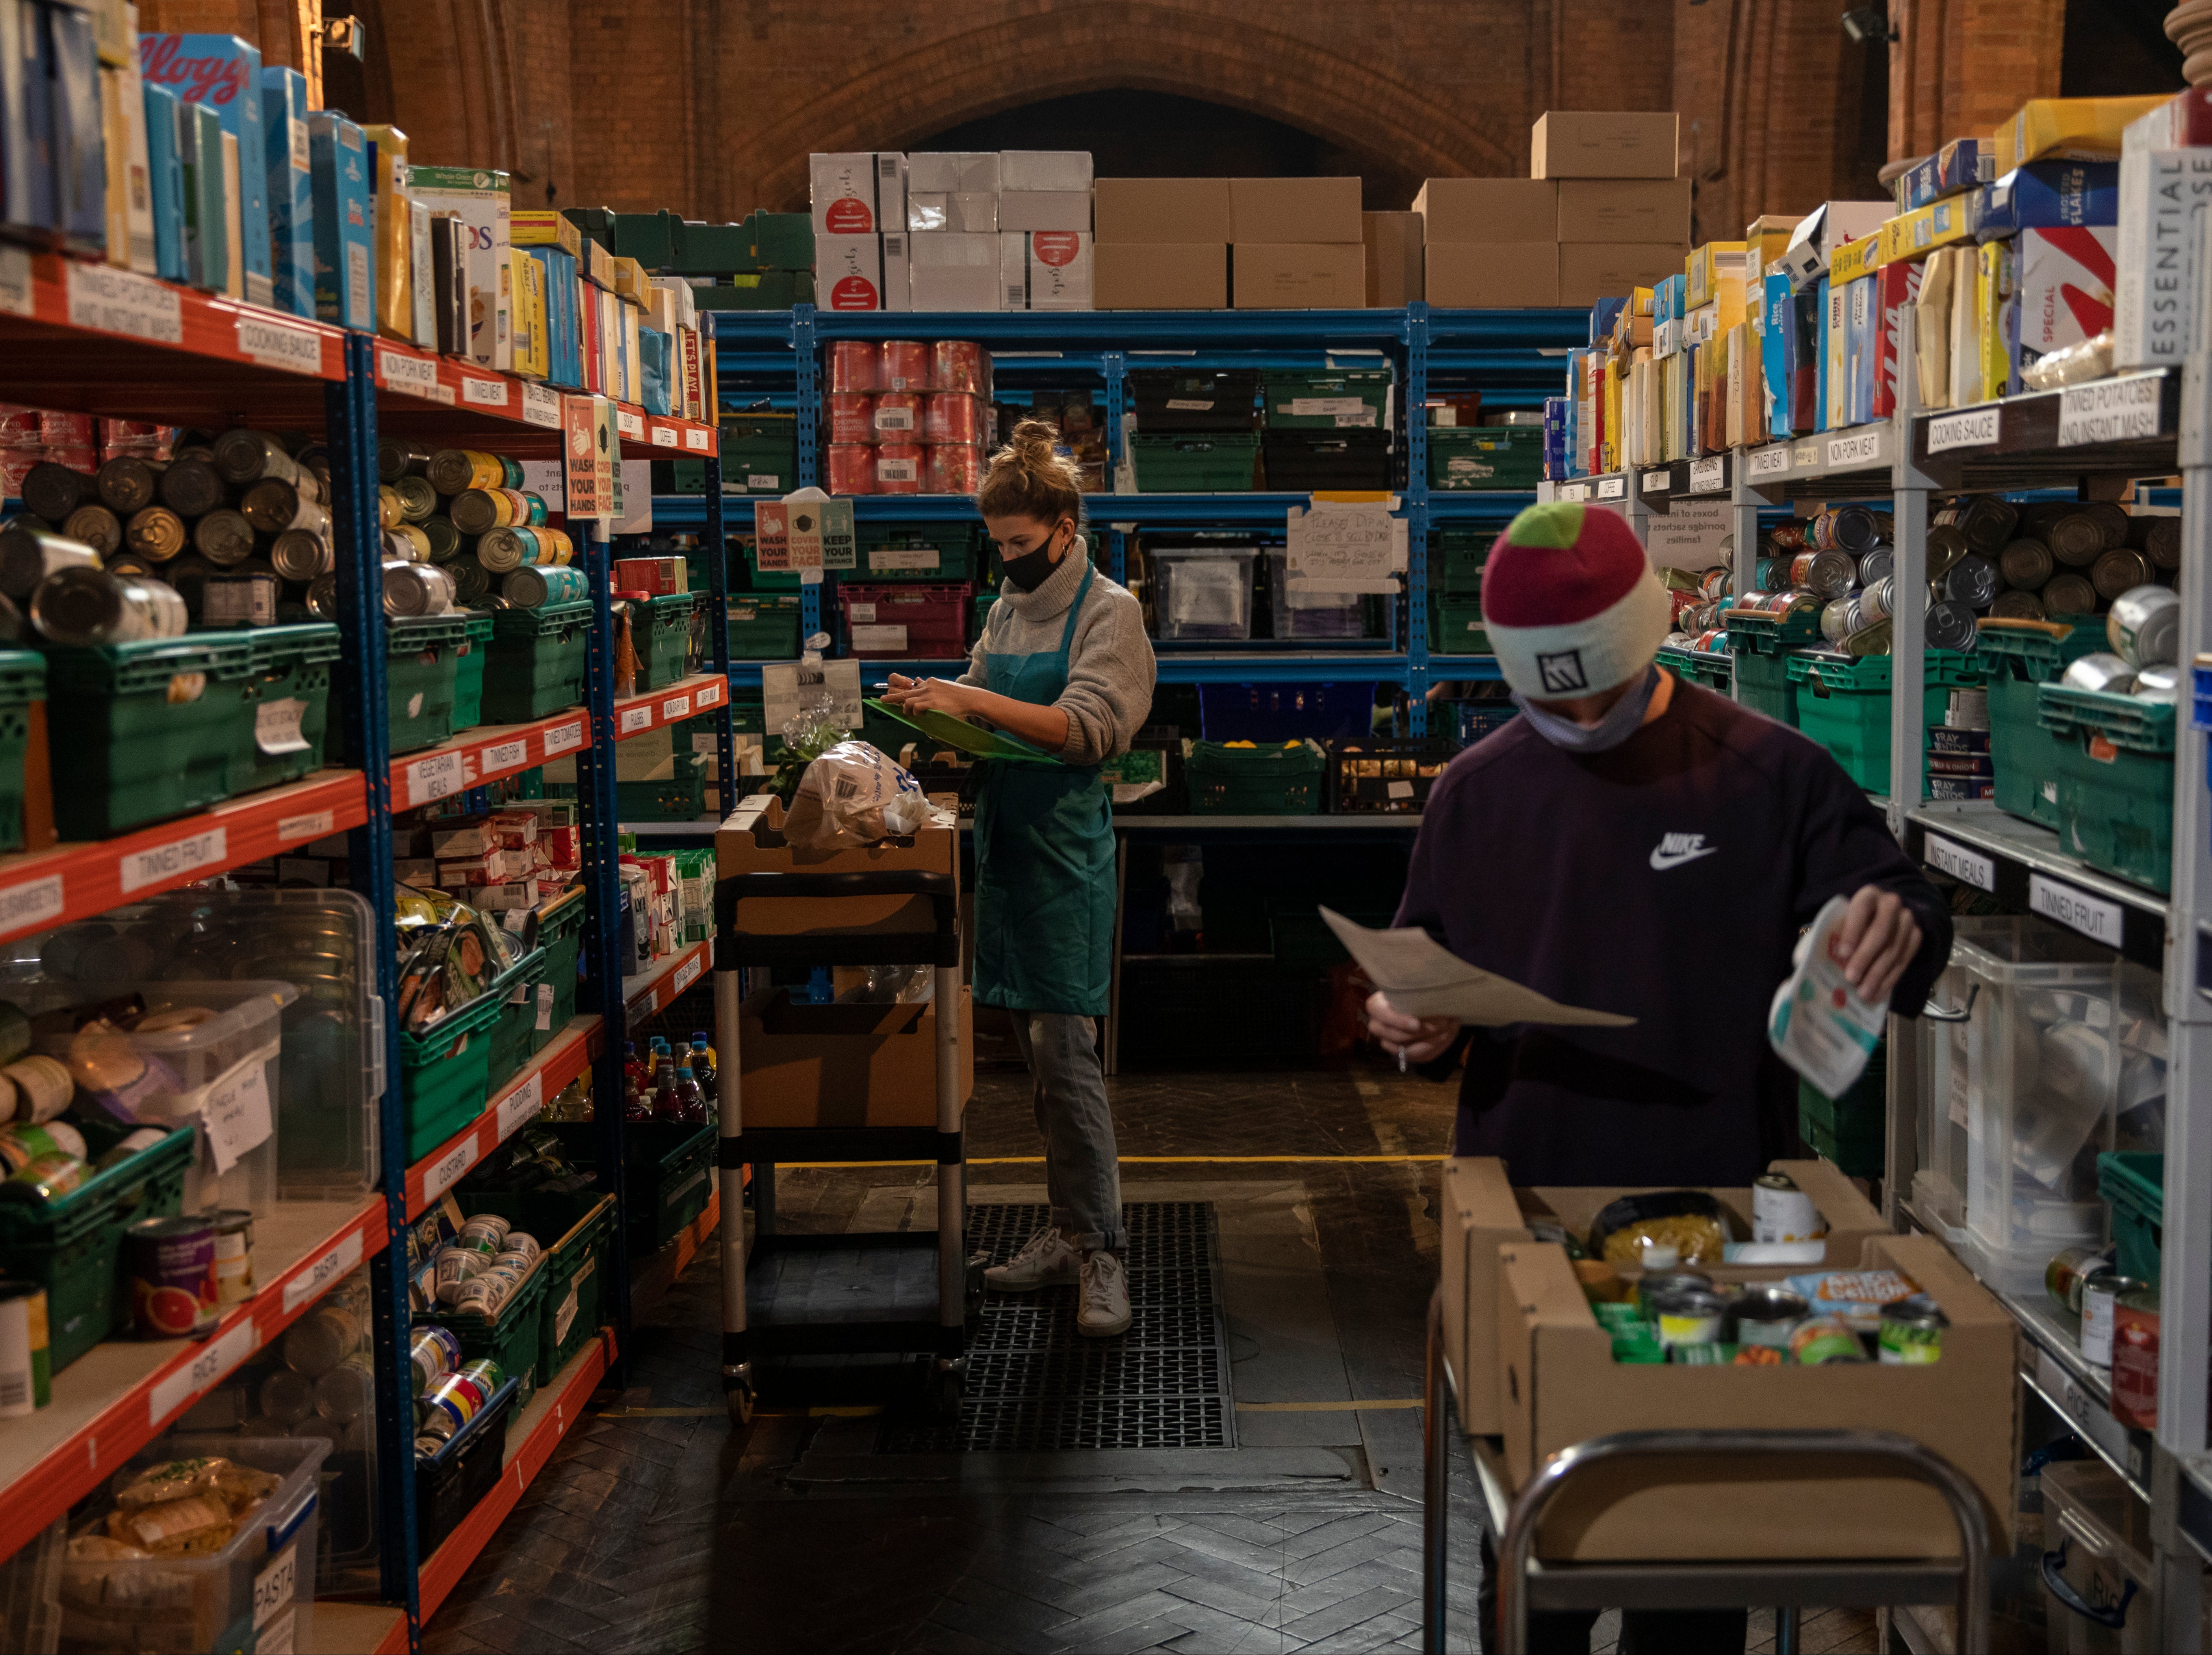 Staff and volunteers pack food parcels at the Norwood and Brixton foodbank at St Margaret’s Church, which is supported by The Trussell Trust